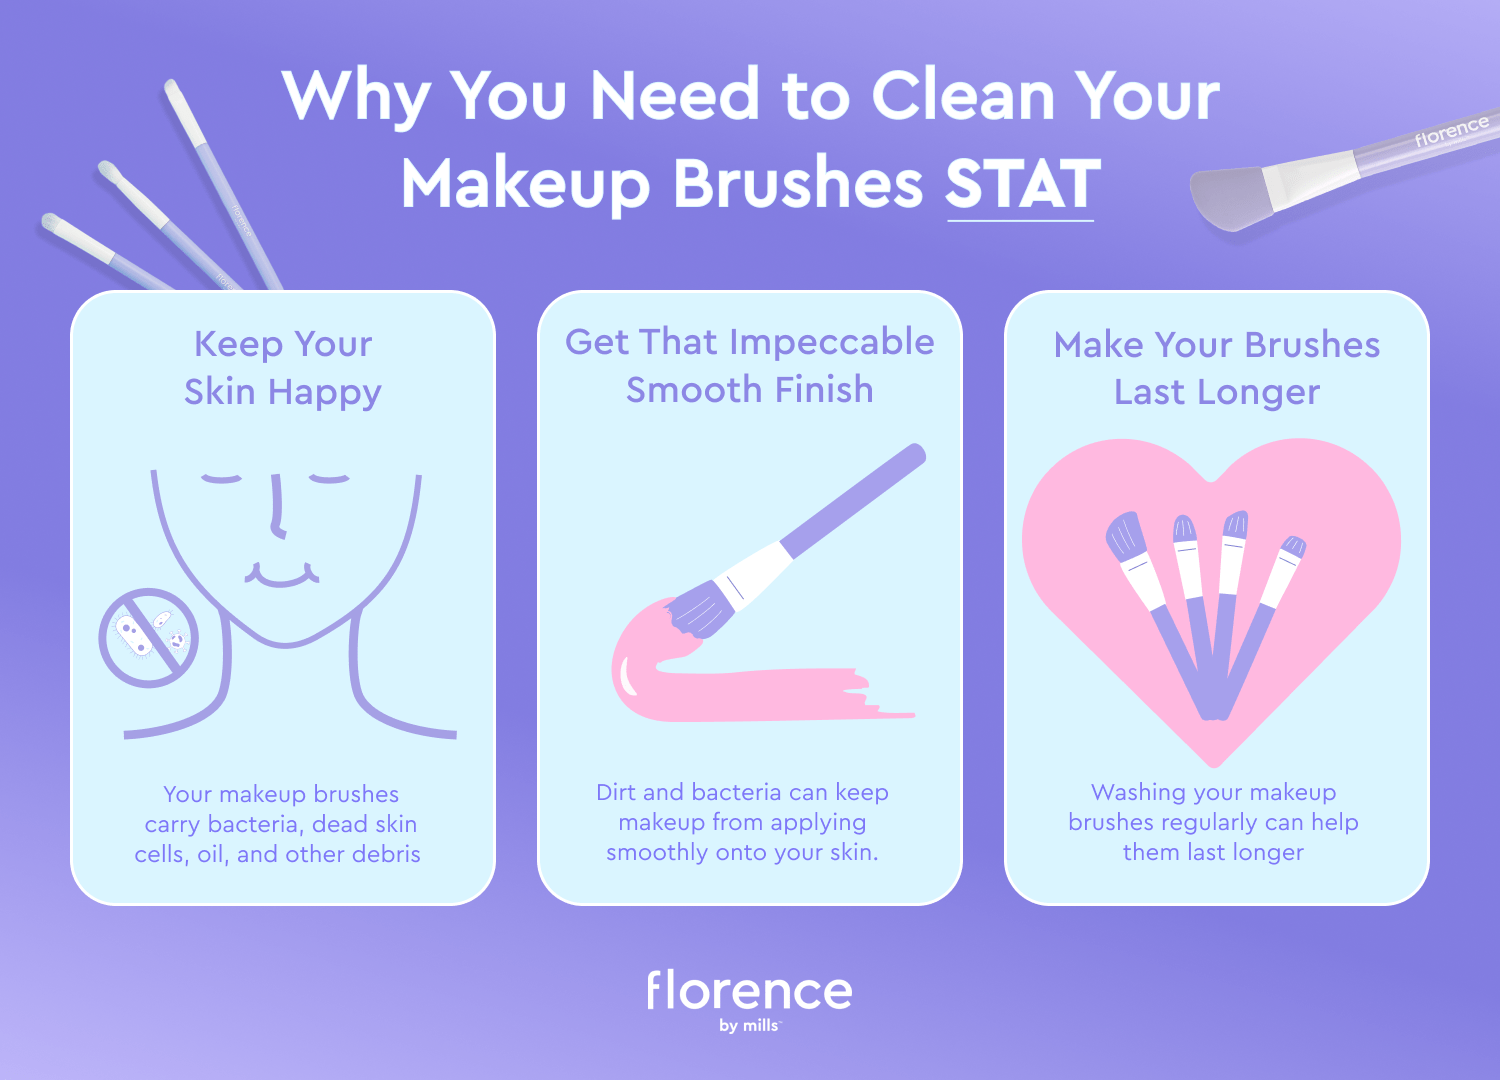 Why you need to clean your makeup brushes stat by florence by mills